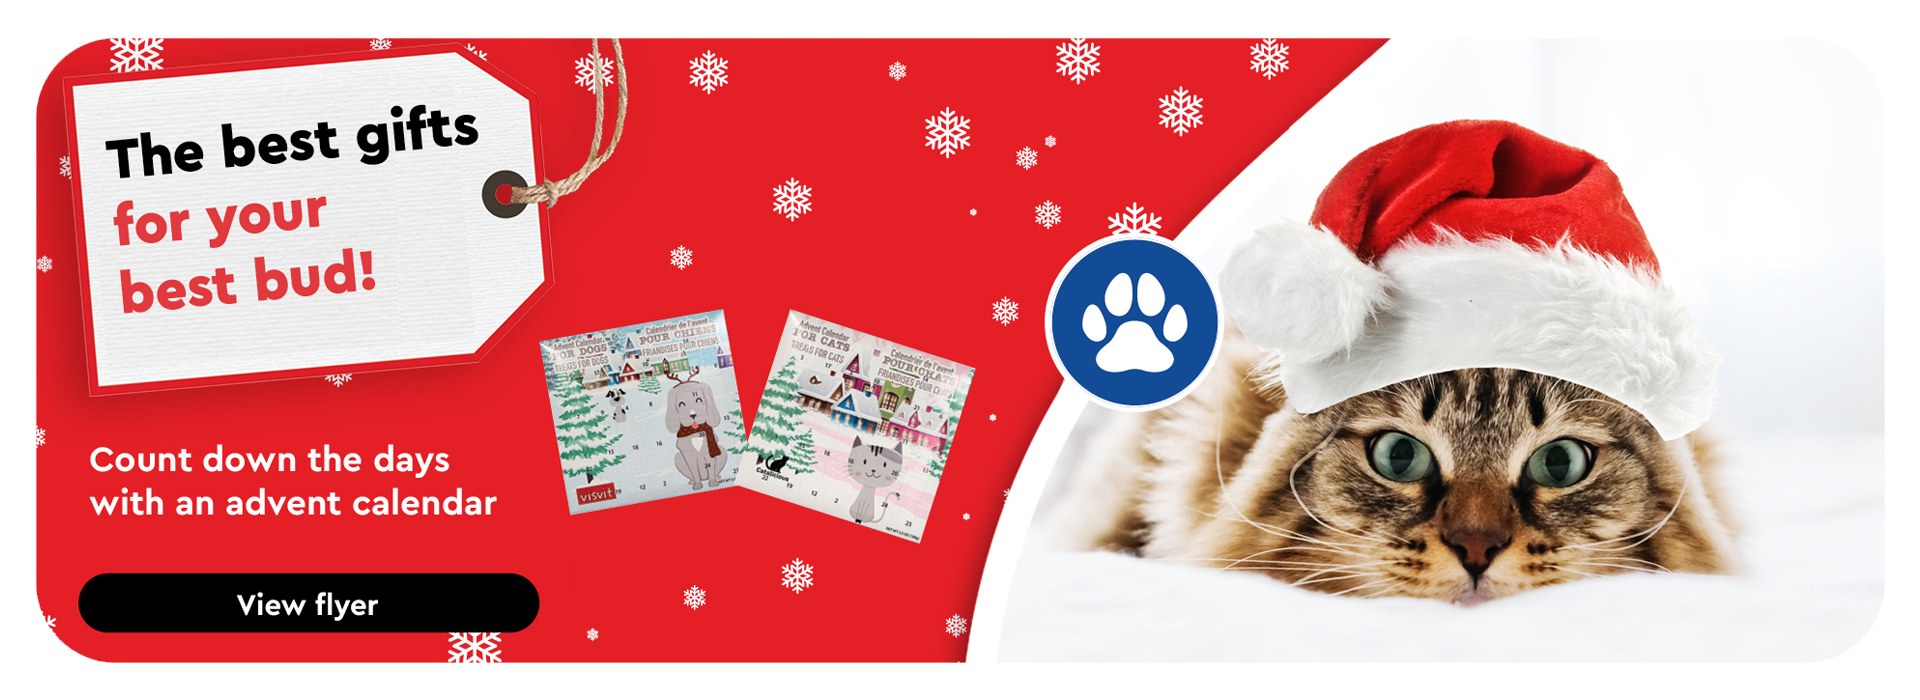 Text Reading 'The best gifts for your best bud! Count down the days with an advent calendar. 'View flyer' by clicking the button below.'